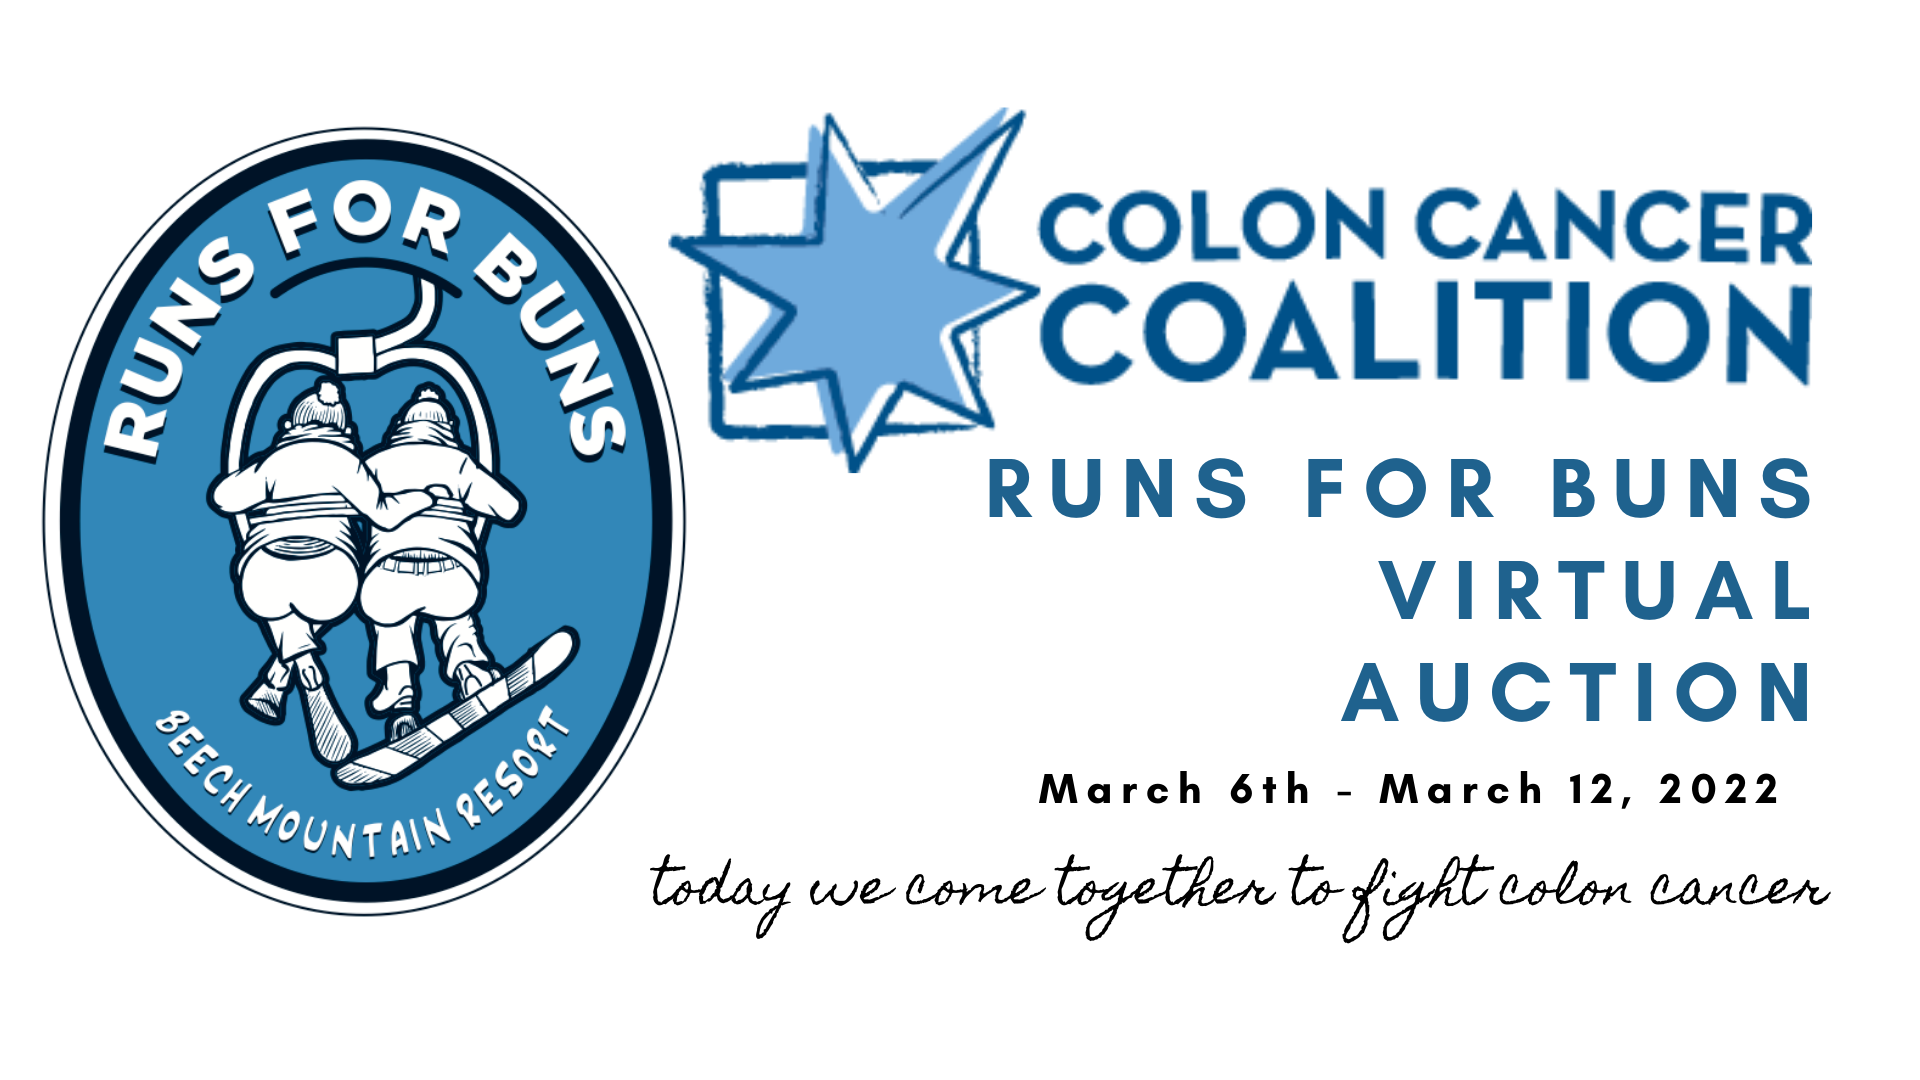 Runs for Buns Virtual Auction flyer with Colon Cancer Coalition Logo as well as Runs for Buns logo. Times March 6th-March 12th and a quote 'today we come together to fight colon cancer'